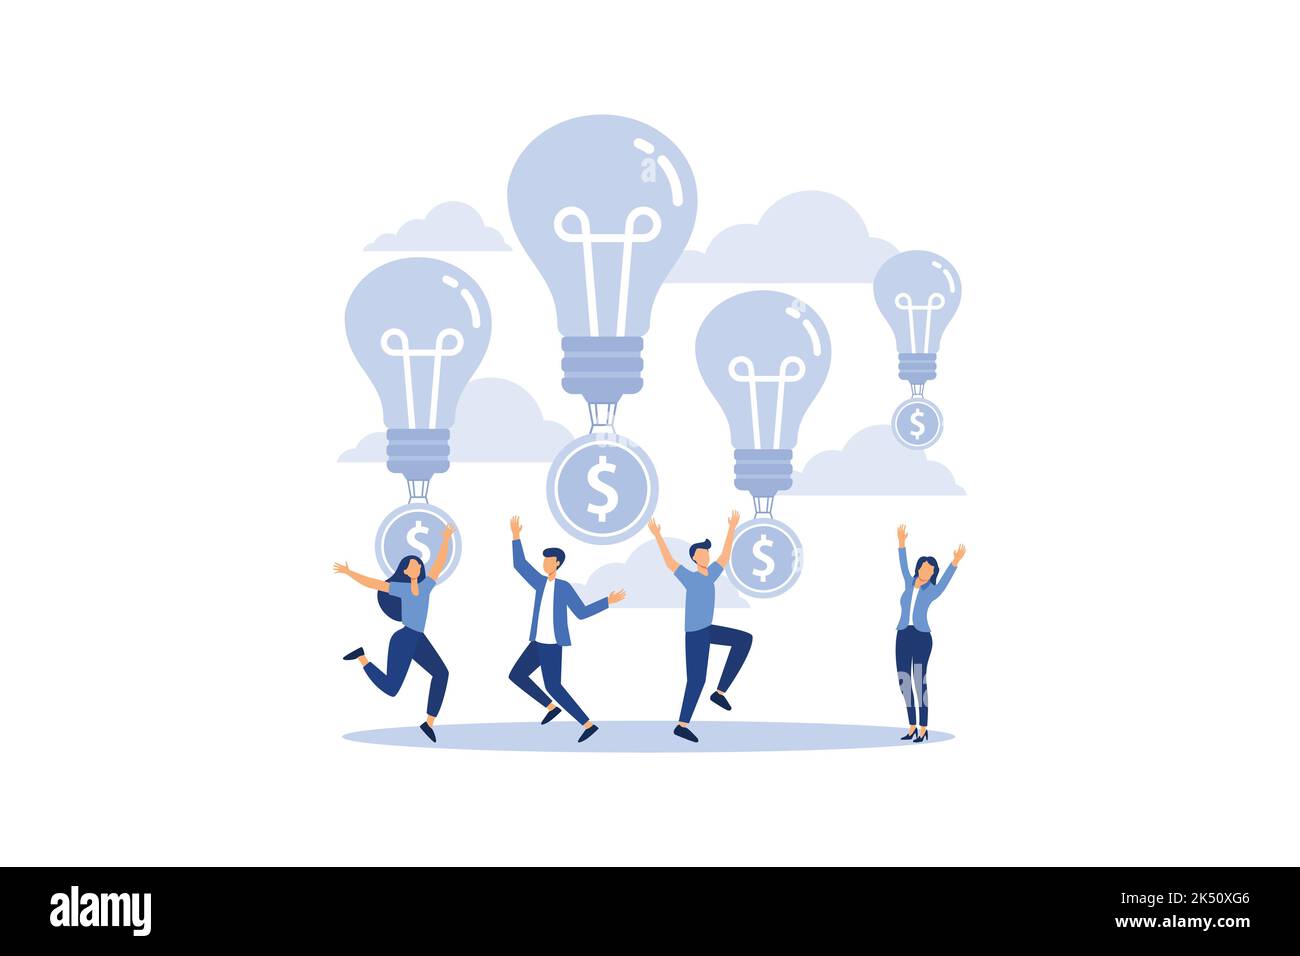 working together in a company, a light bulb takes off with coins up, ideas bring income to the company flat vector illustration Stock Vector